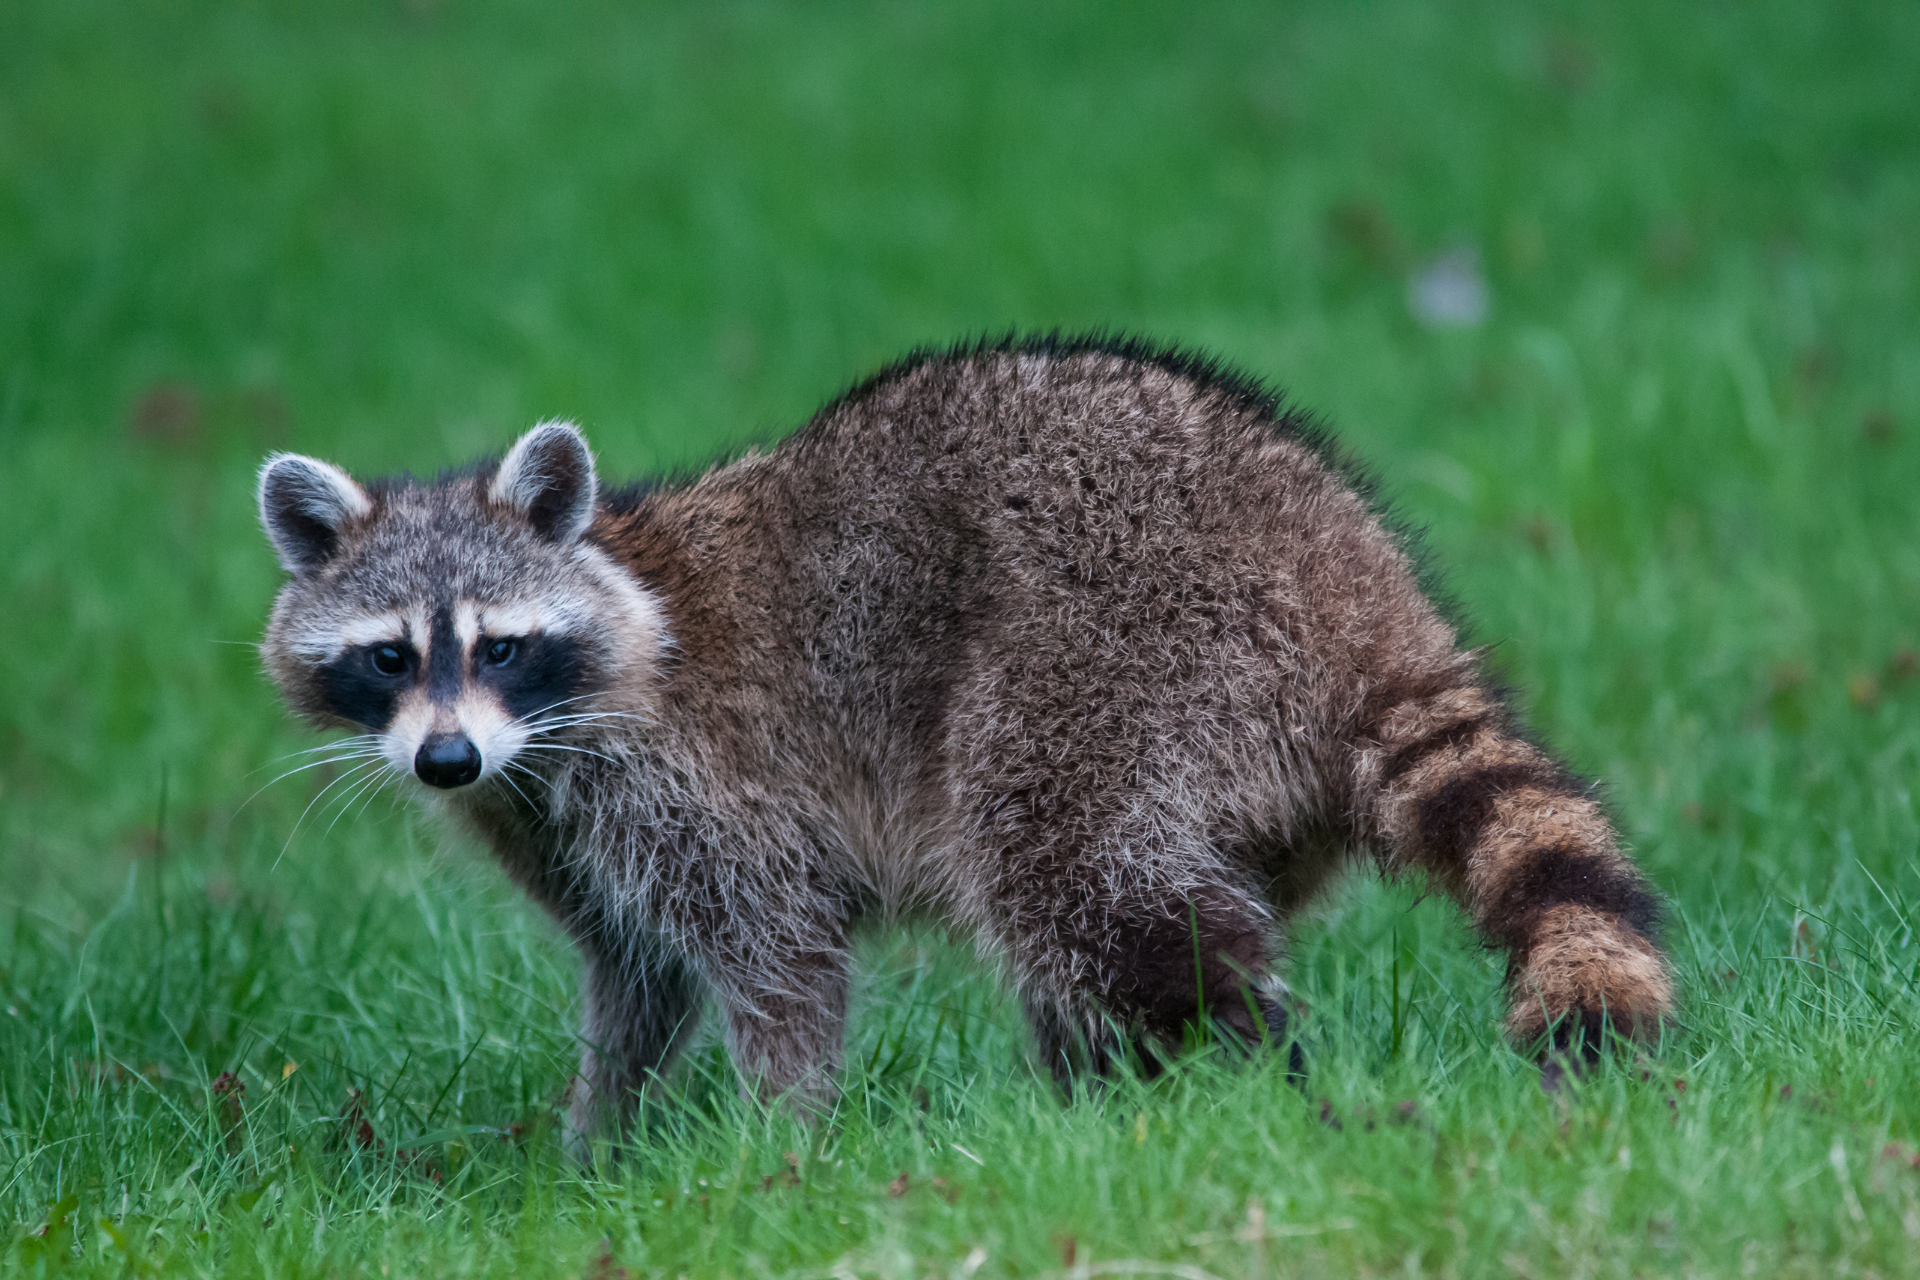 a raccoon is standing in the grass looking at the camera .